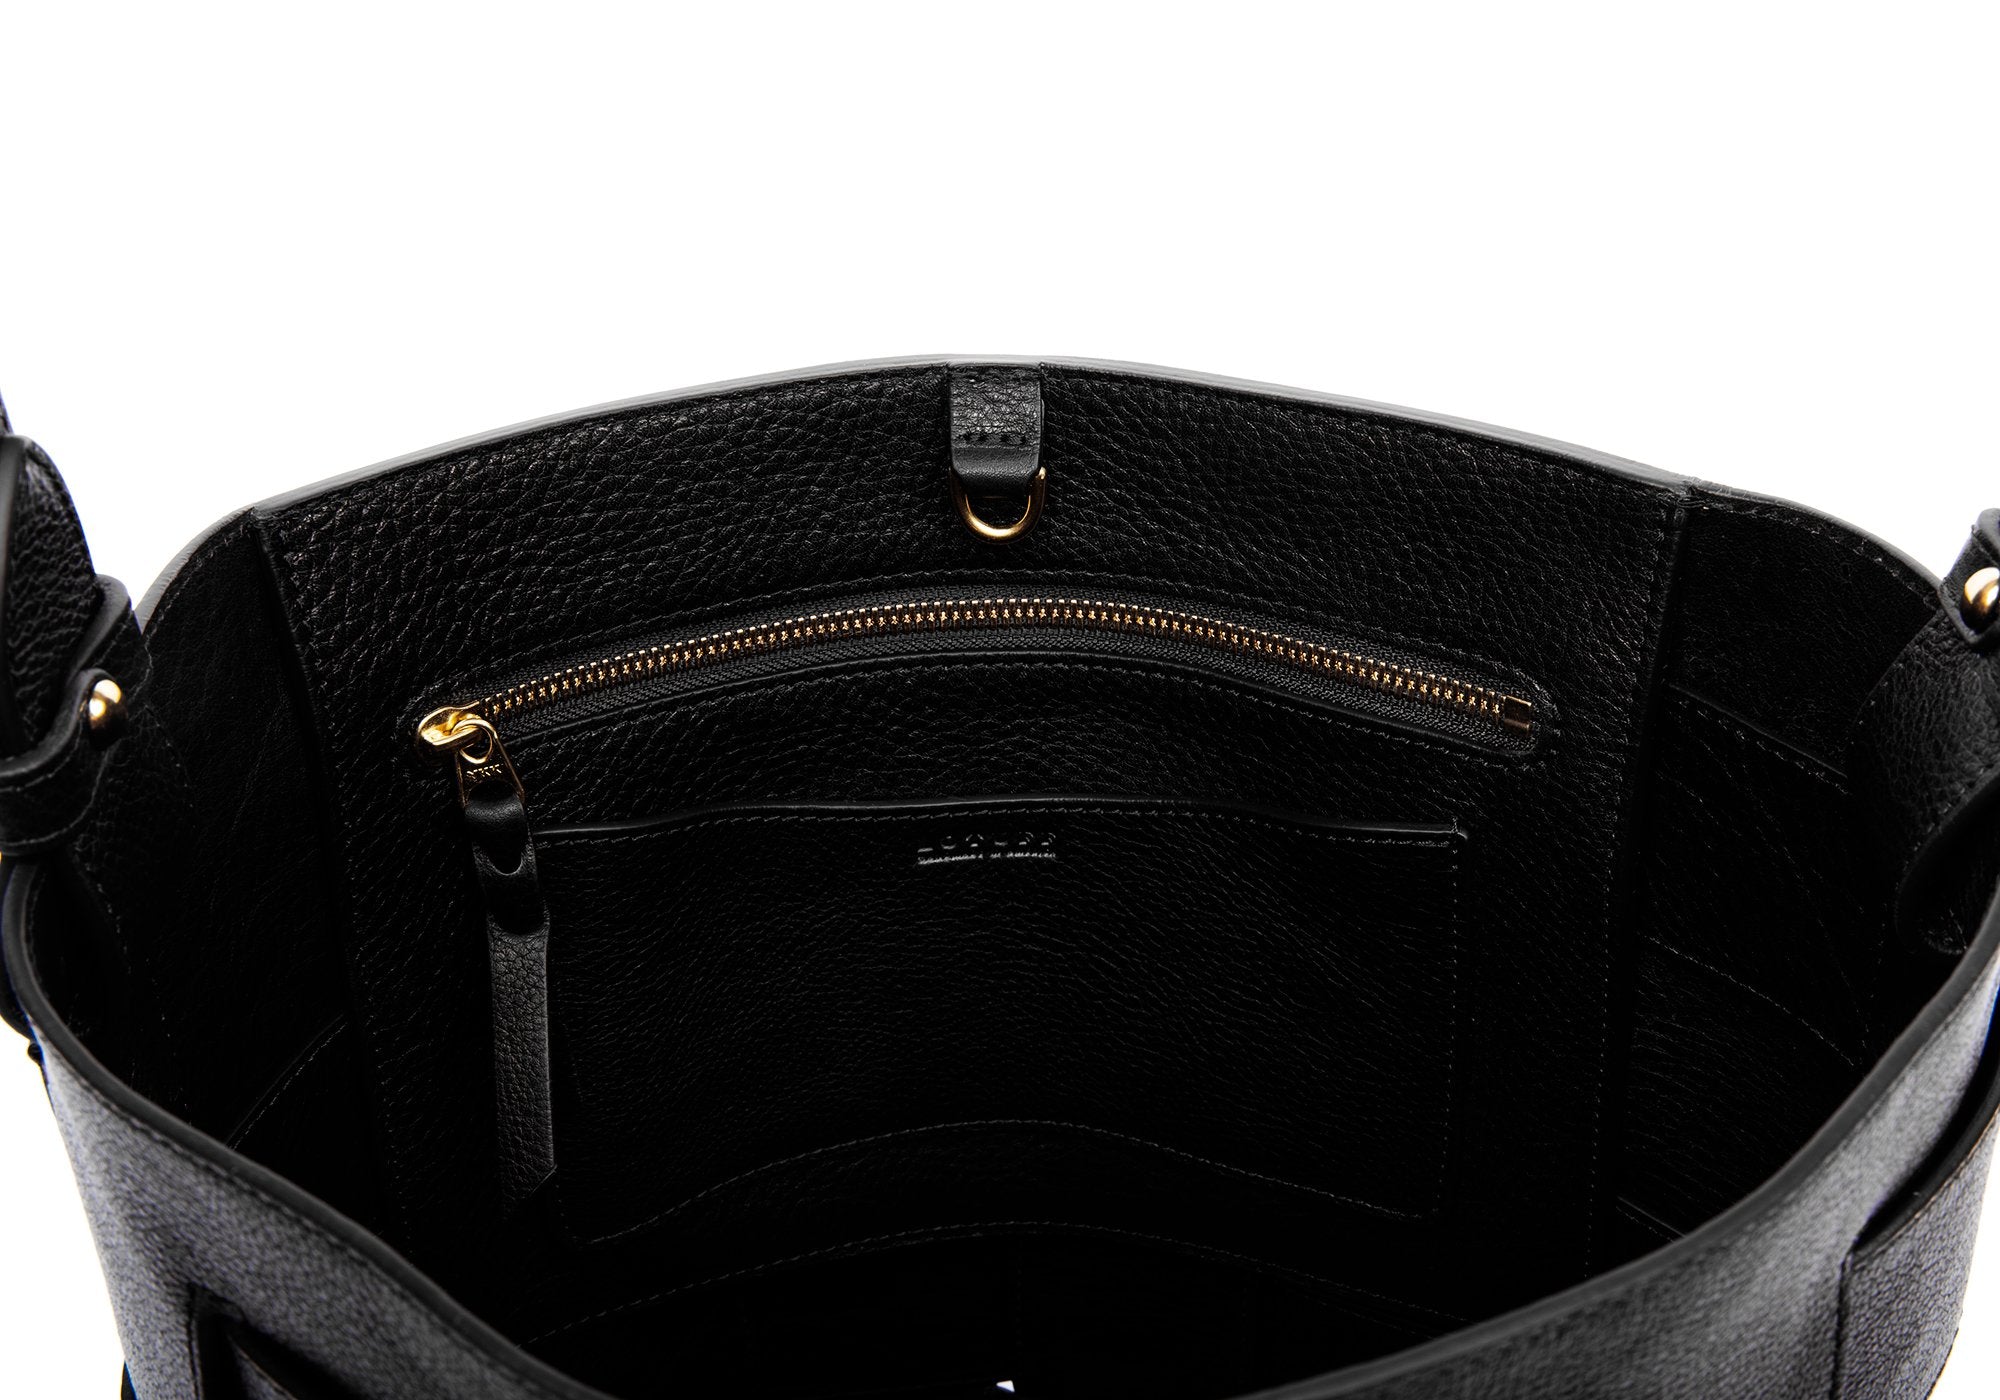 Black Tote Handbag with Zipper: Lilly – Bicyclist: Handmade Leather Goods